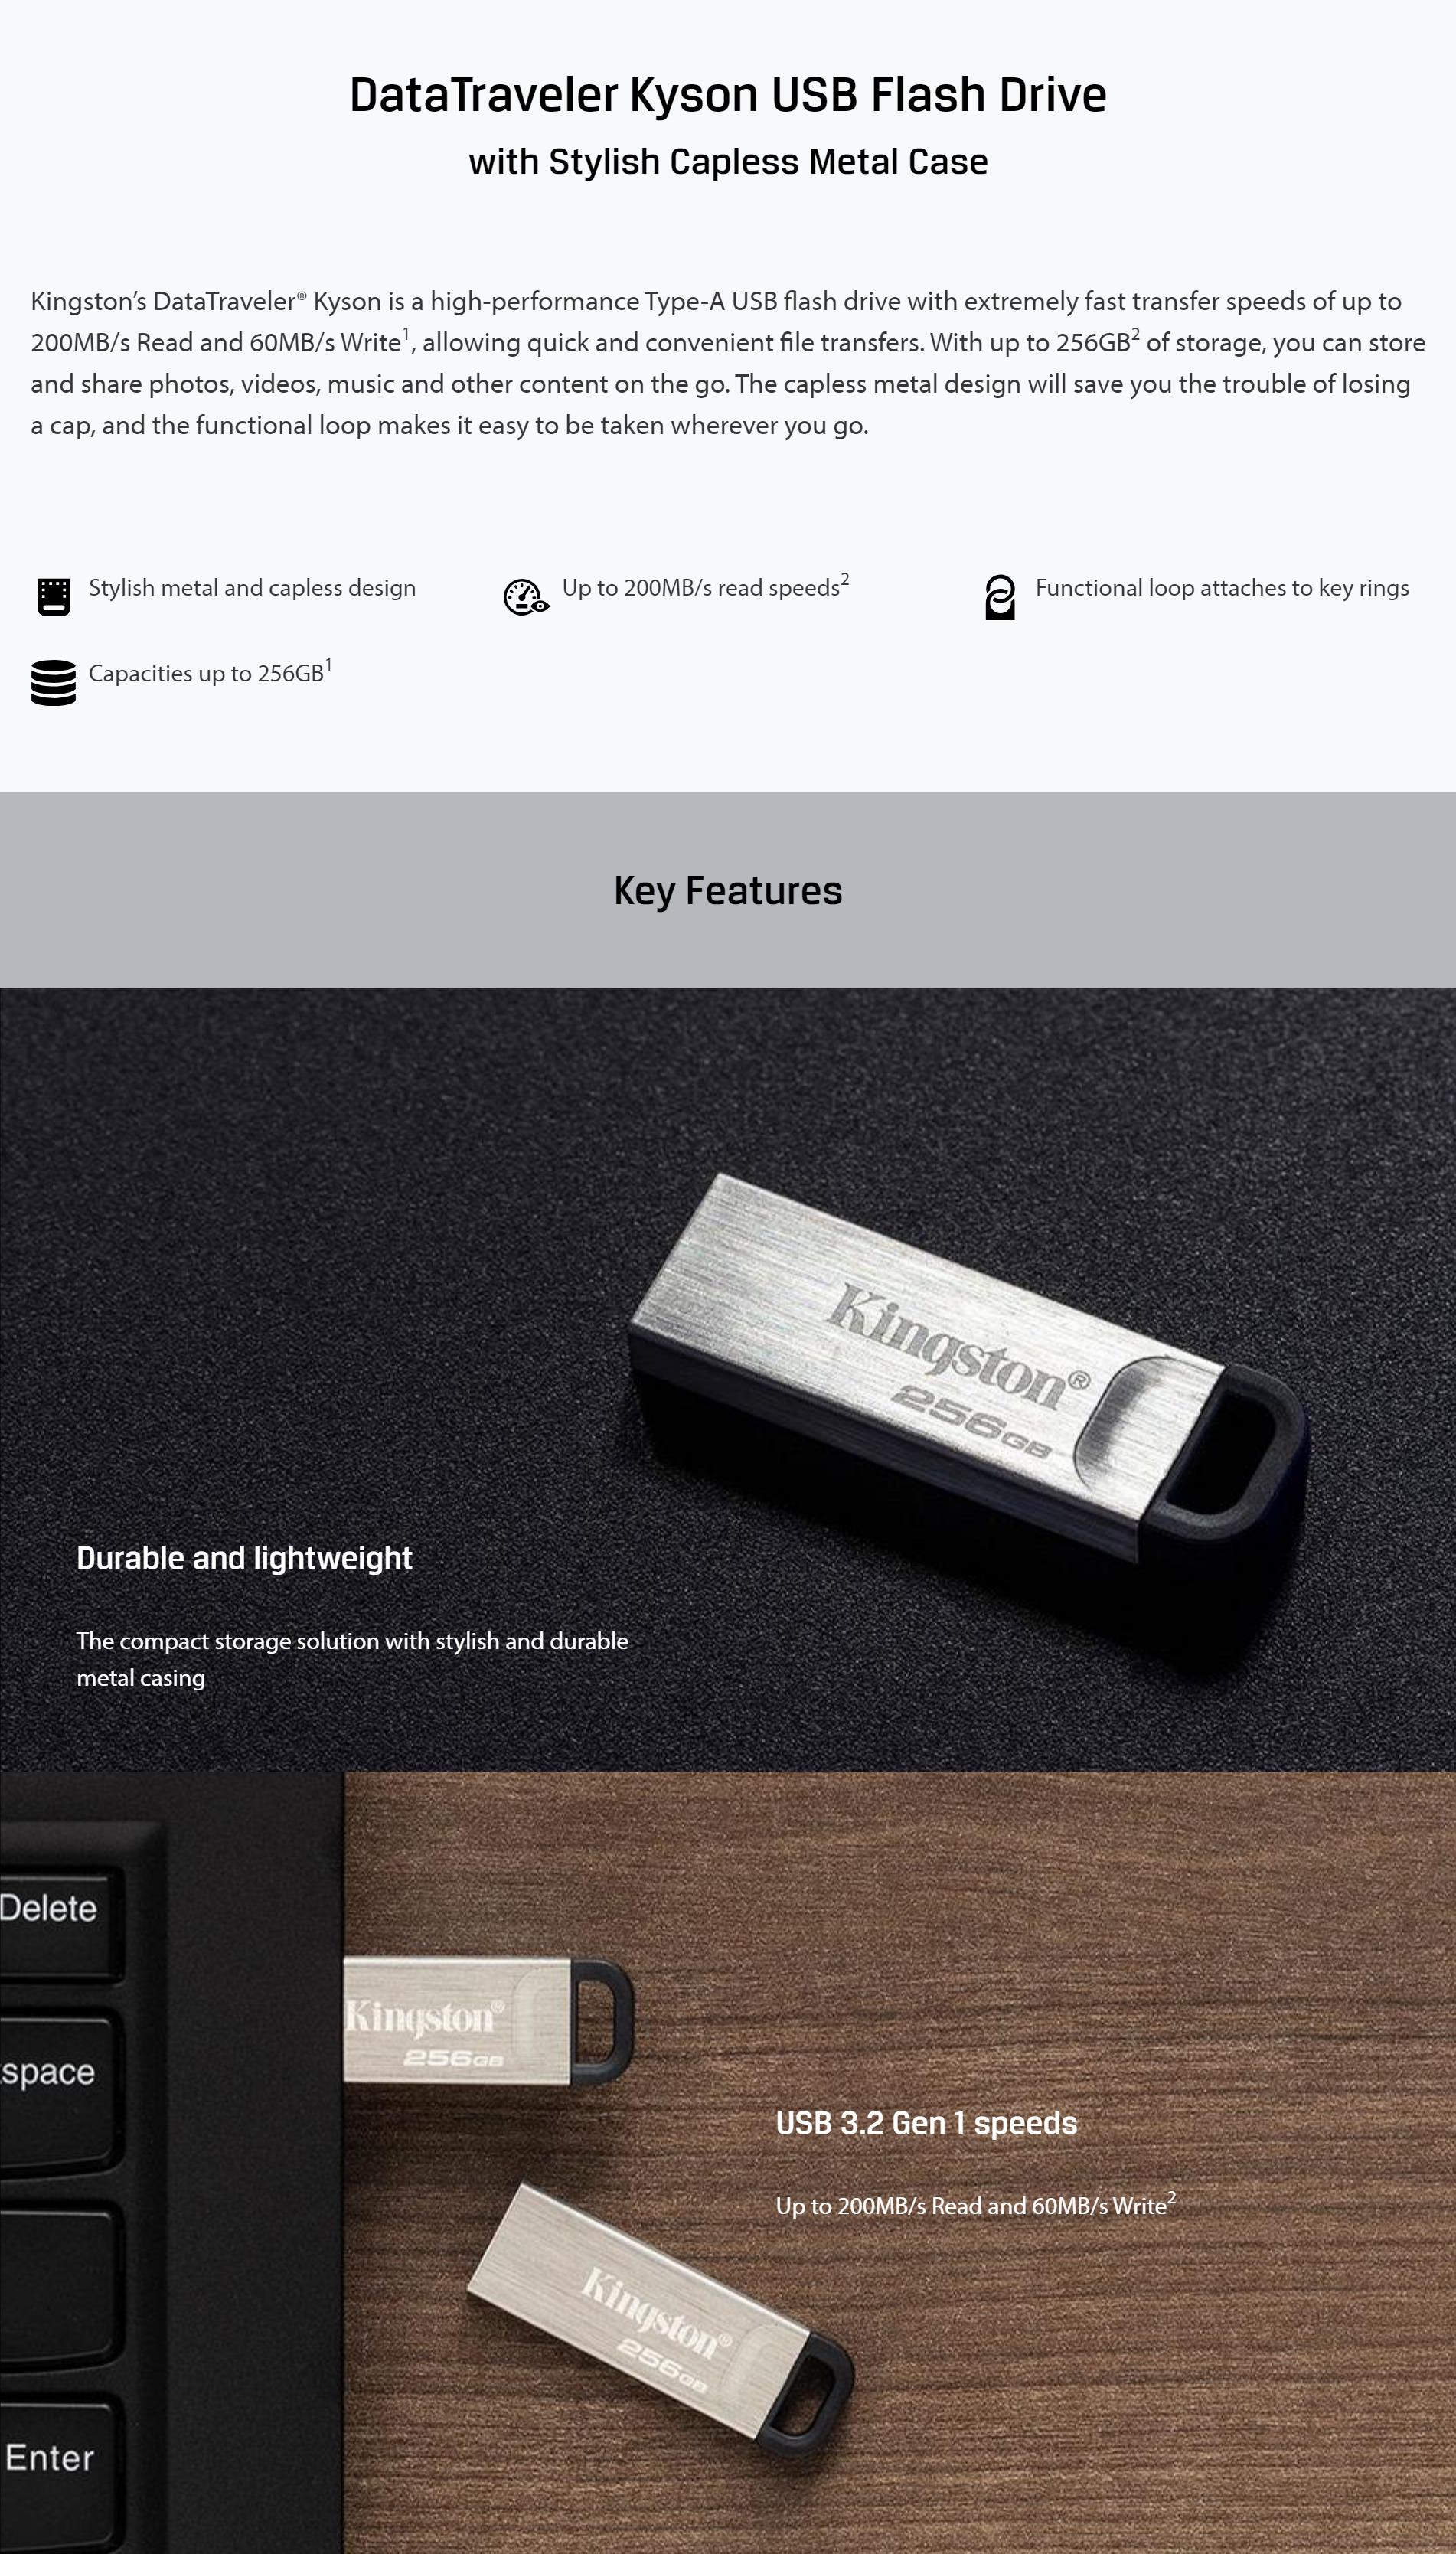 A large marketing image providing additional information about the product Kingston DataTraveler Kyson USB 3.2 128GB Flash Drive - Additional alt info not provided